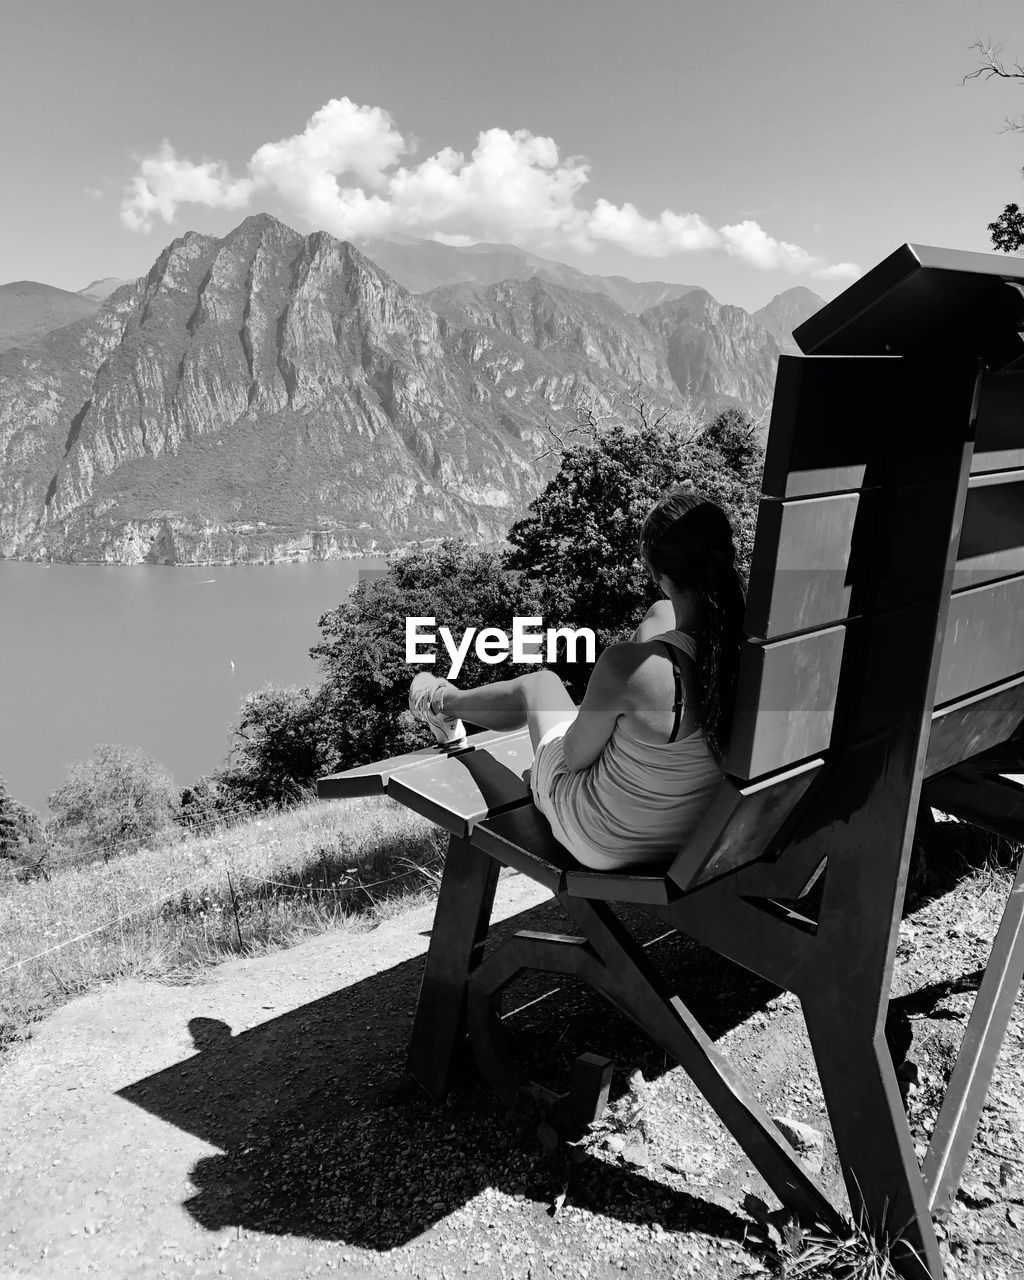 mountain, nature, mountain range, black and white, sitting, seat, beauty in nature, scenics - nature, adult, relaxation, chair, sky, monochrome photography, leisure activity, one person, monochrome, white, landscape, sunlight, full length, environment, tranquil scene, land, day, furniture, tranquility, black, vacation, activity, outdoors, plant, travel, trip, holiday, men, women, lifestyles, travel destinations, cloud, bench, non-urban scene